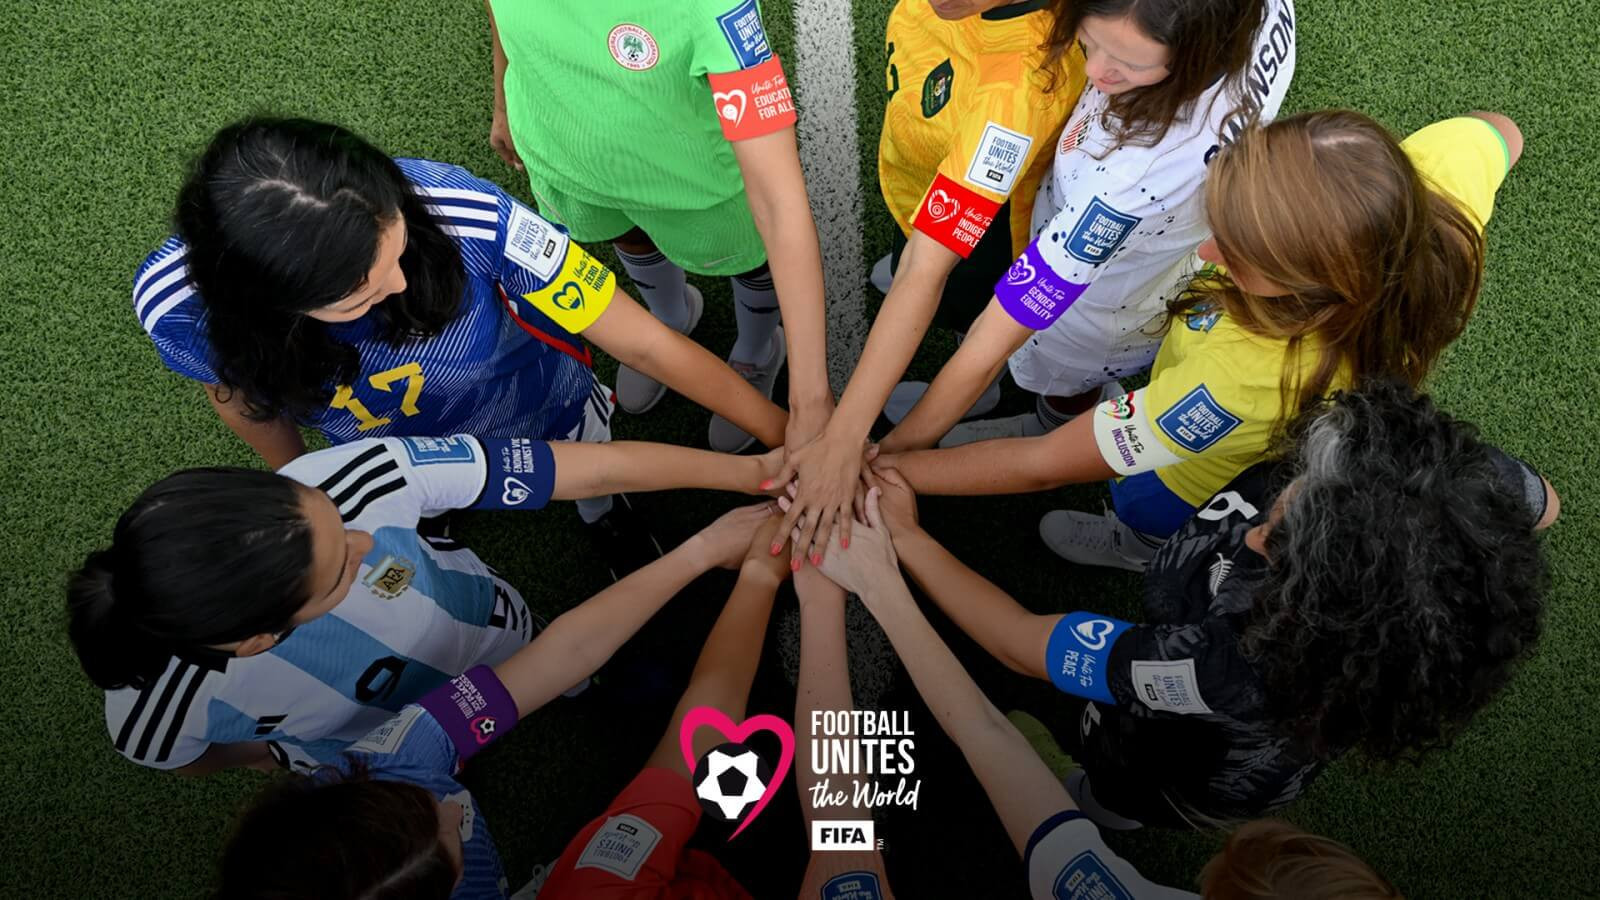 UN Women and FIFA combine to promote gender equality at 2023 Women's World Cup